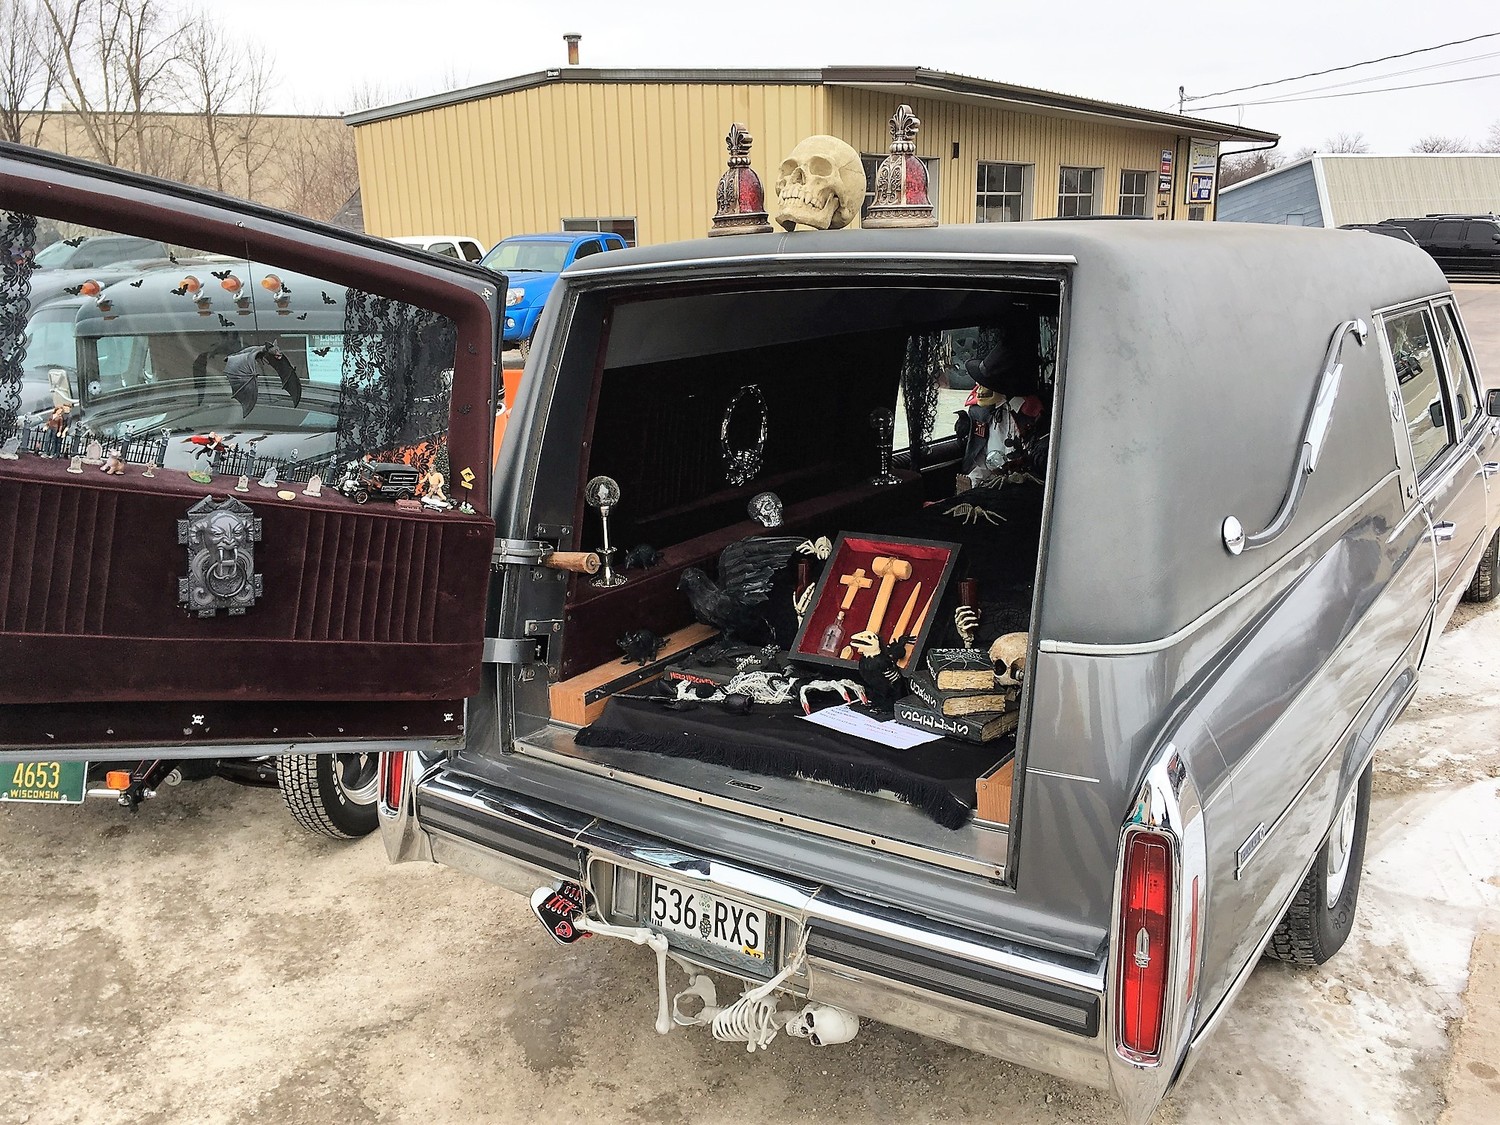 , Inaugural Polar-Rama puts hot rods on ice in Wisconsin, ClassicCars.com Journal